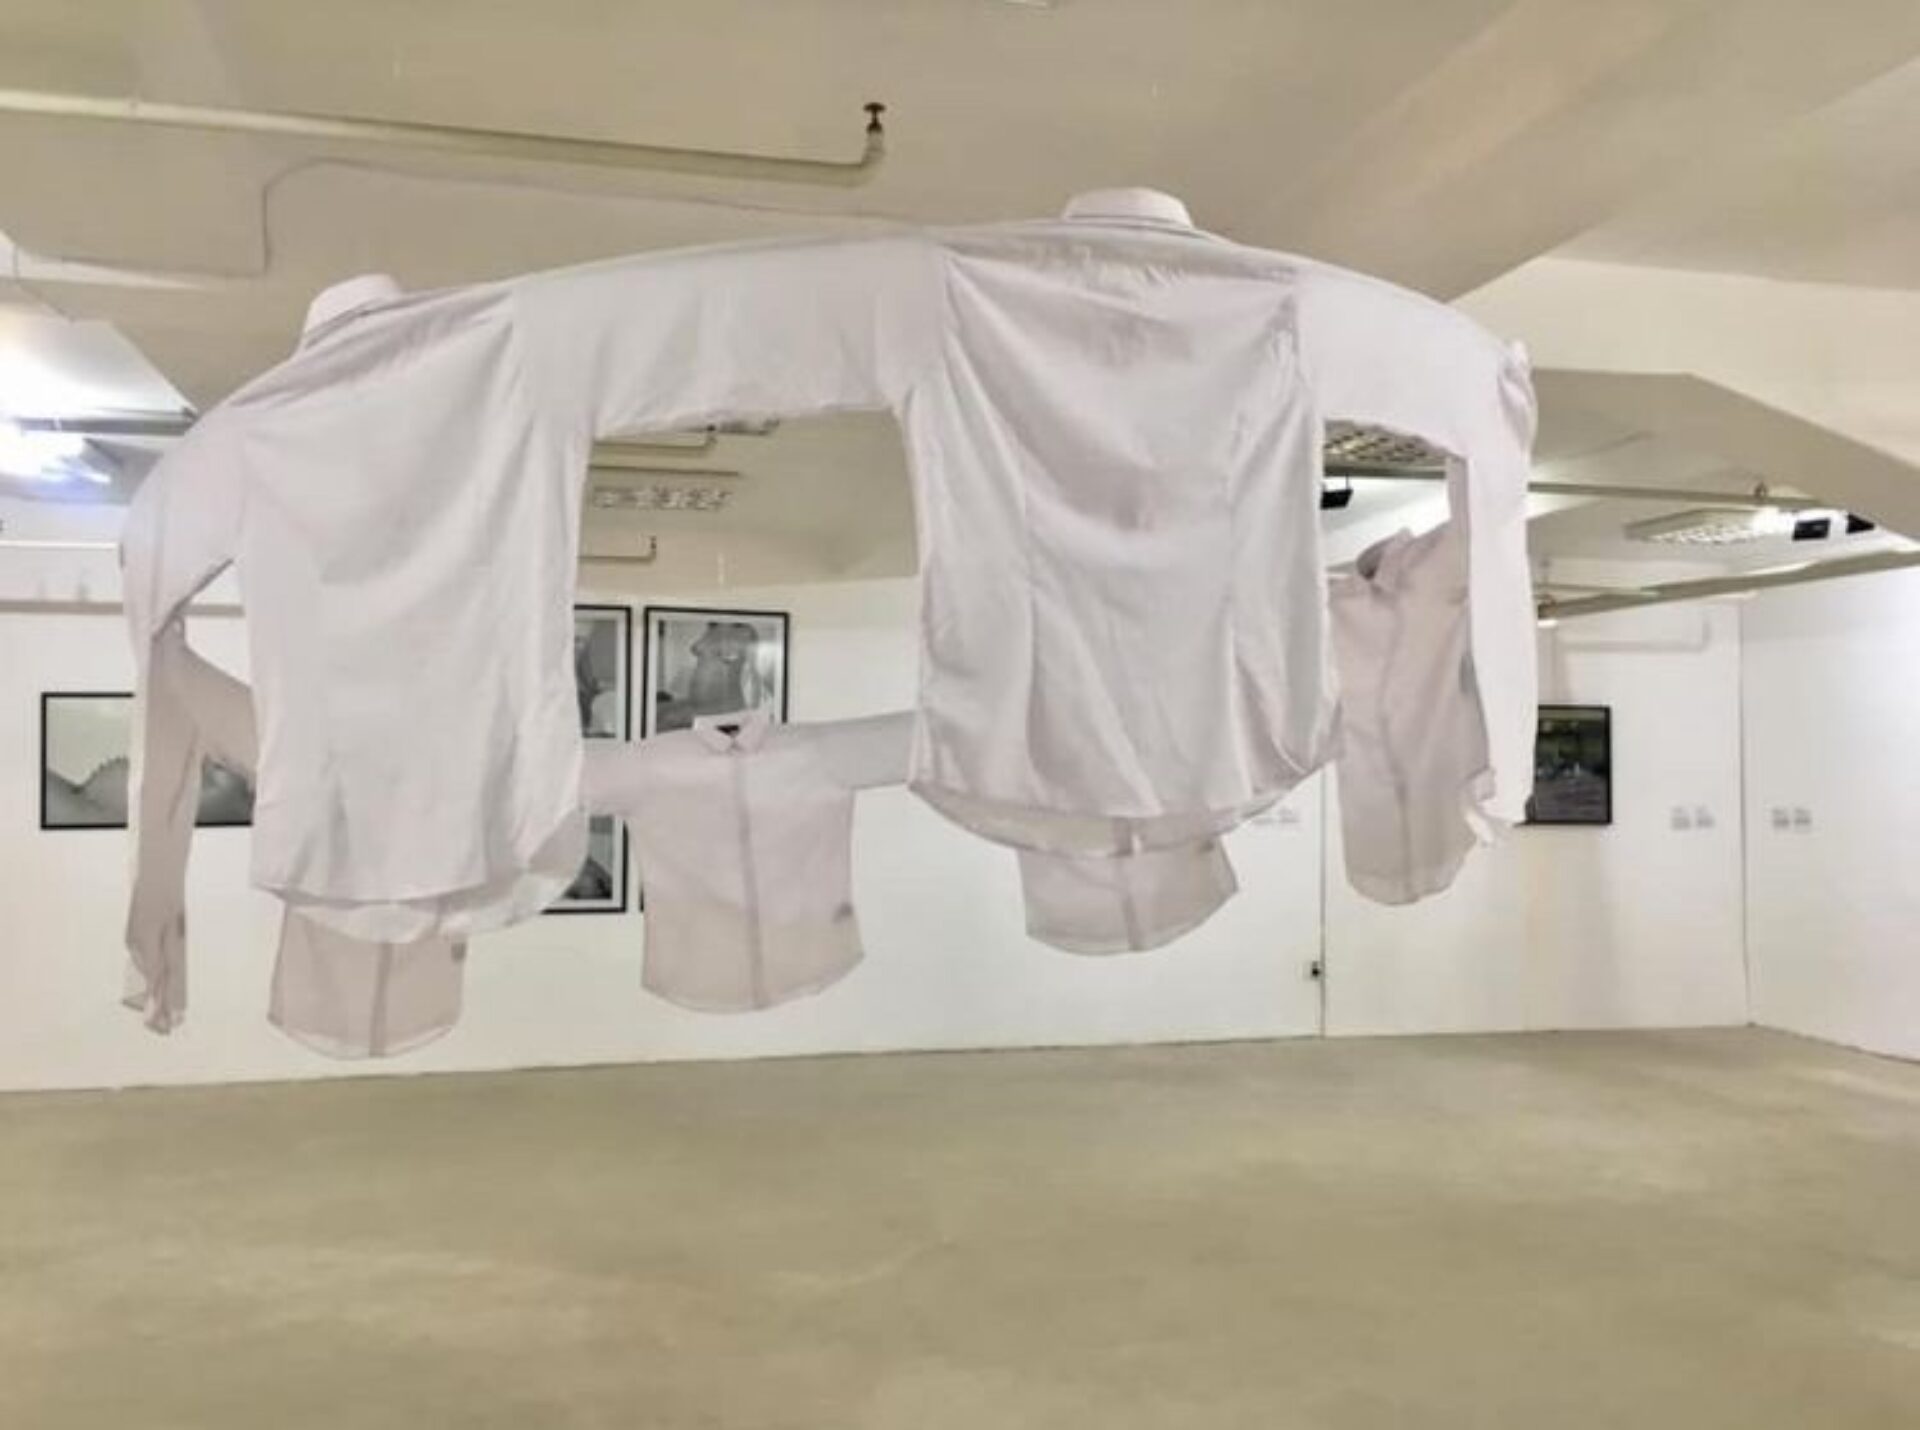 Krassimir Terziev, Let's Dance. Clothes for Collective Life, 1996, 'Listen To Us - Artistic Intelligence', Plovdiv, 2019